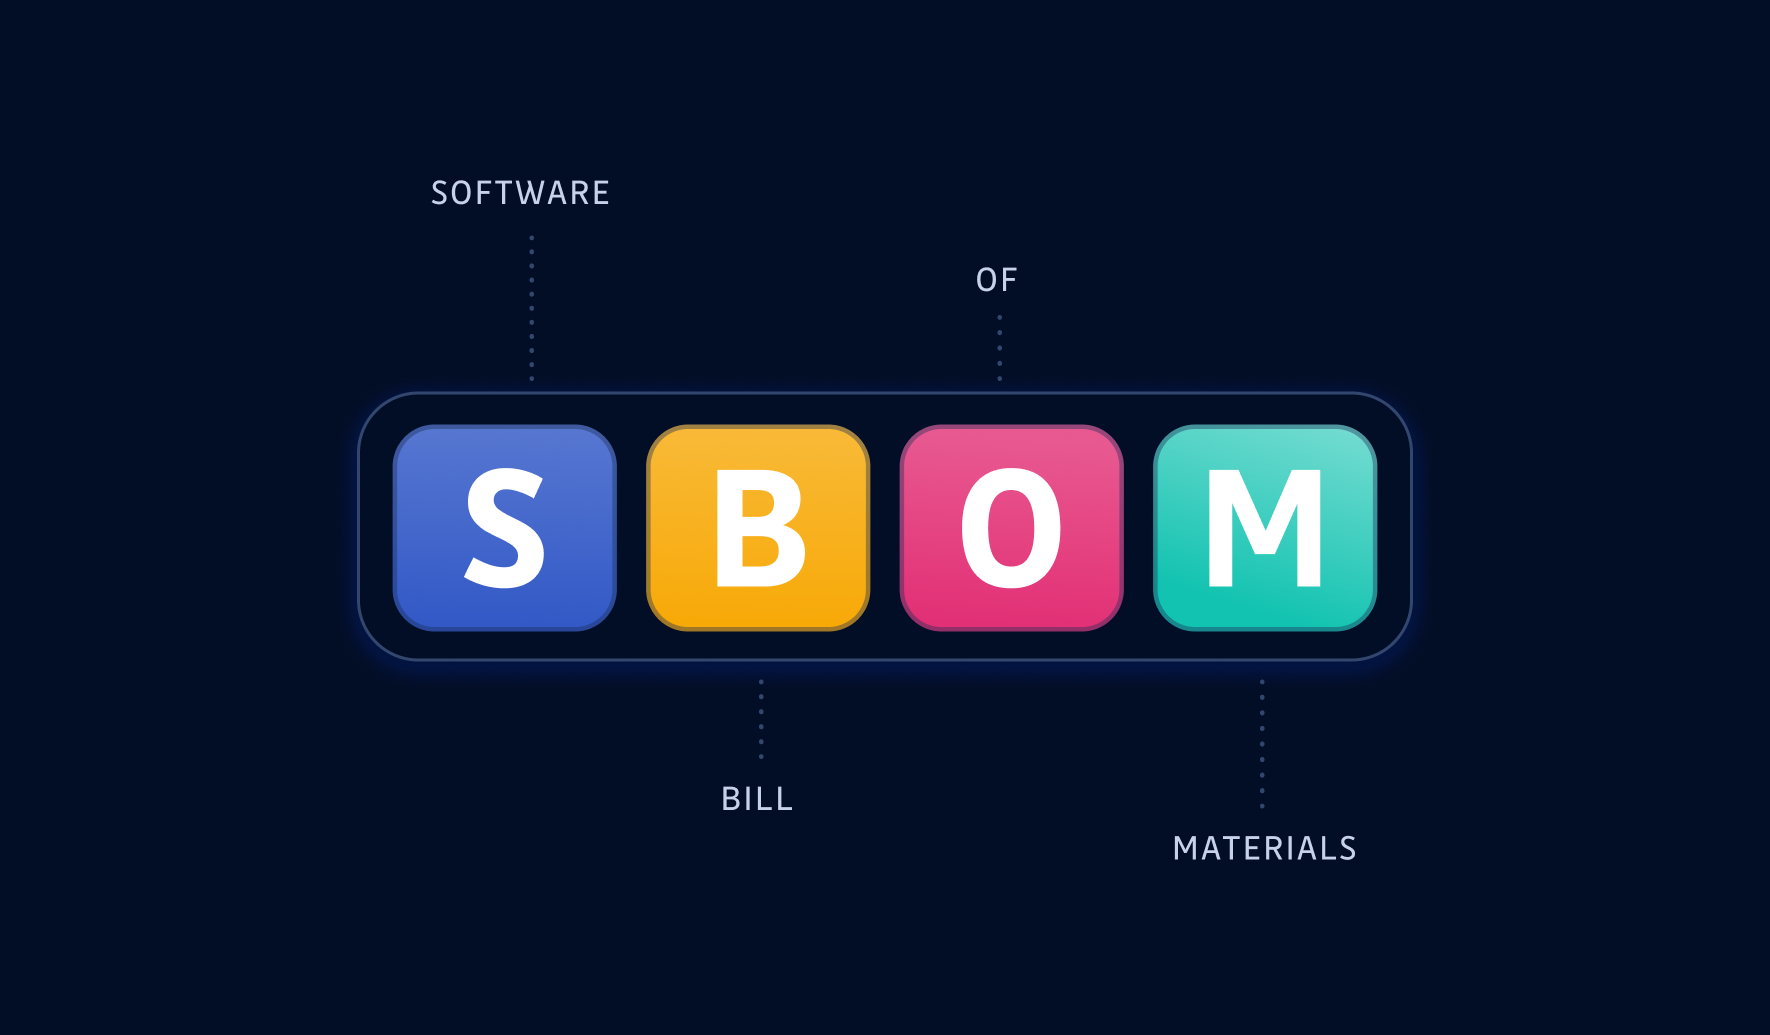 Why you need an SBOM (Software Bill Of Materials)